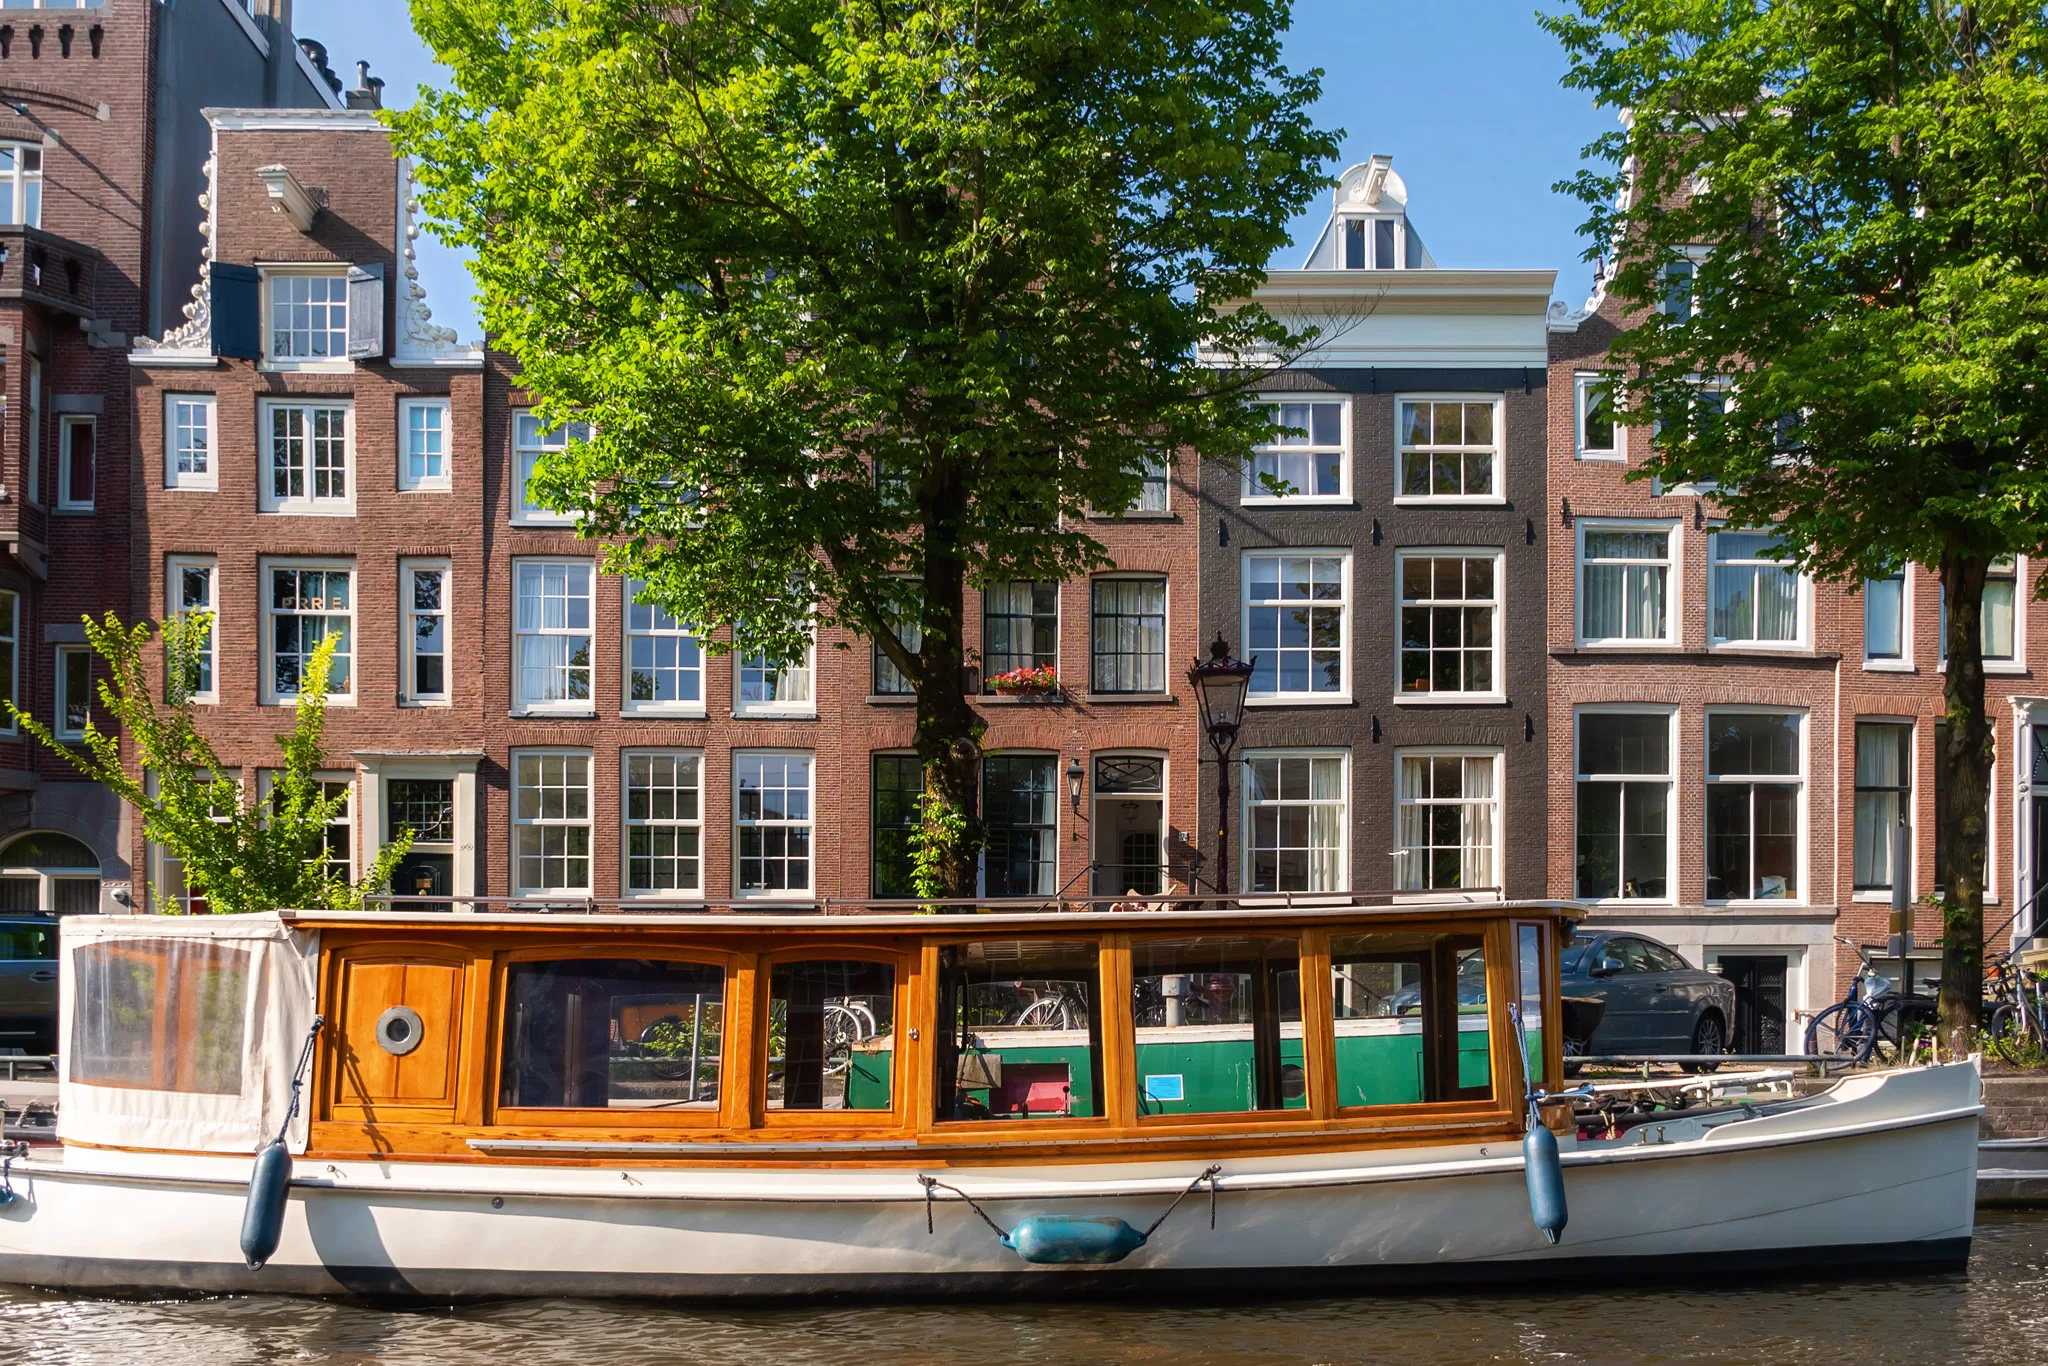 Photo of Amsterdam house taken from a Flagship Amsterdam Canal Boat Tour